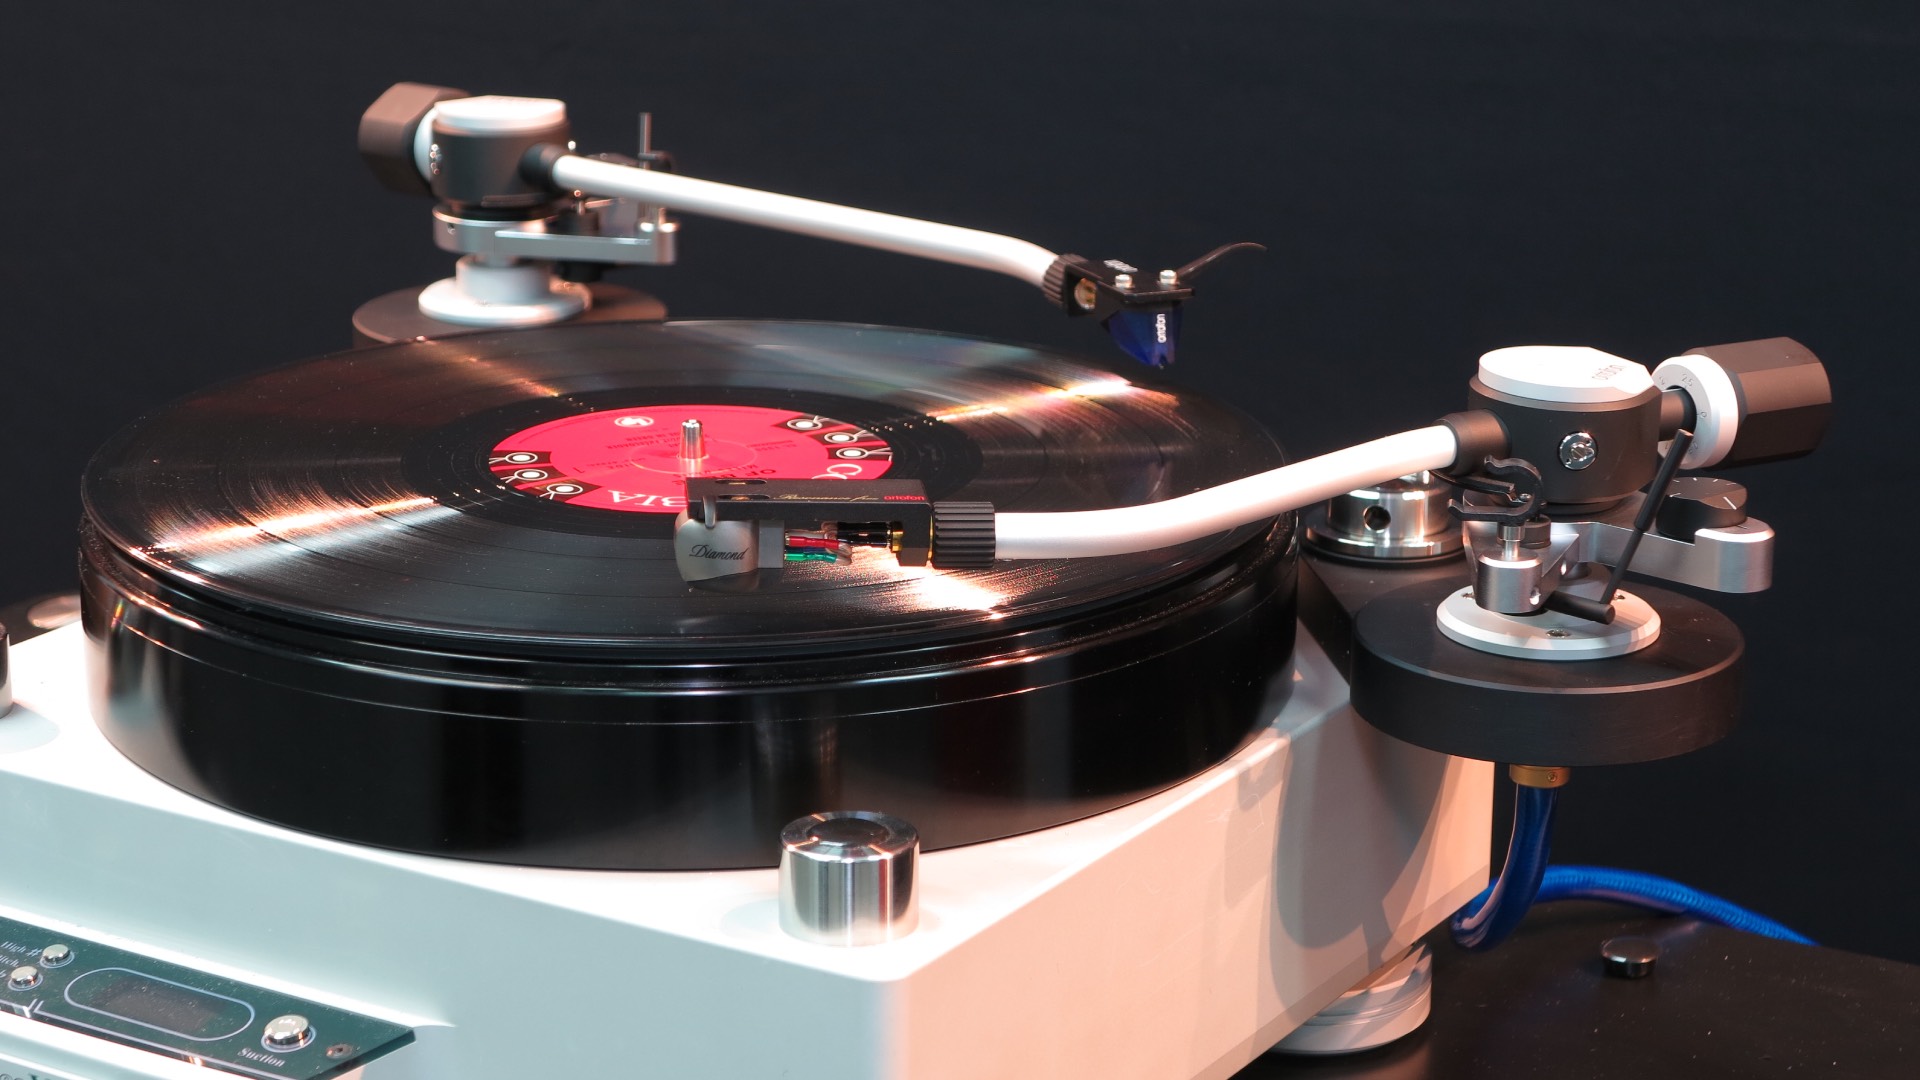 The new tonearms AS-309R and AS-212R by Ortofon